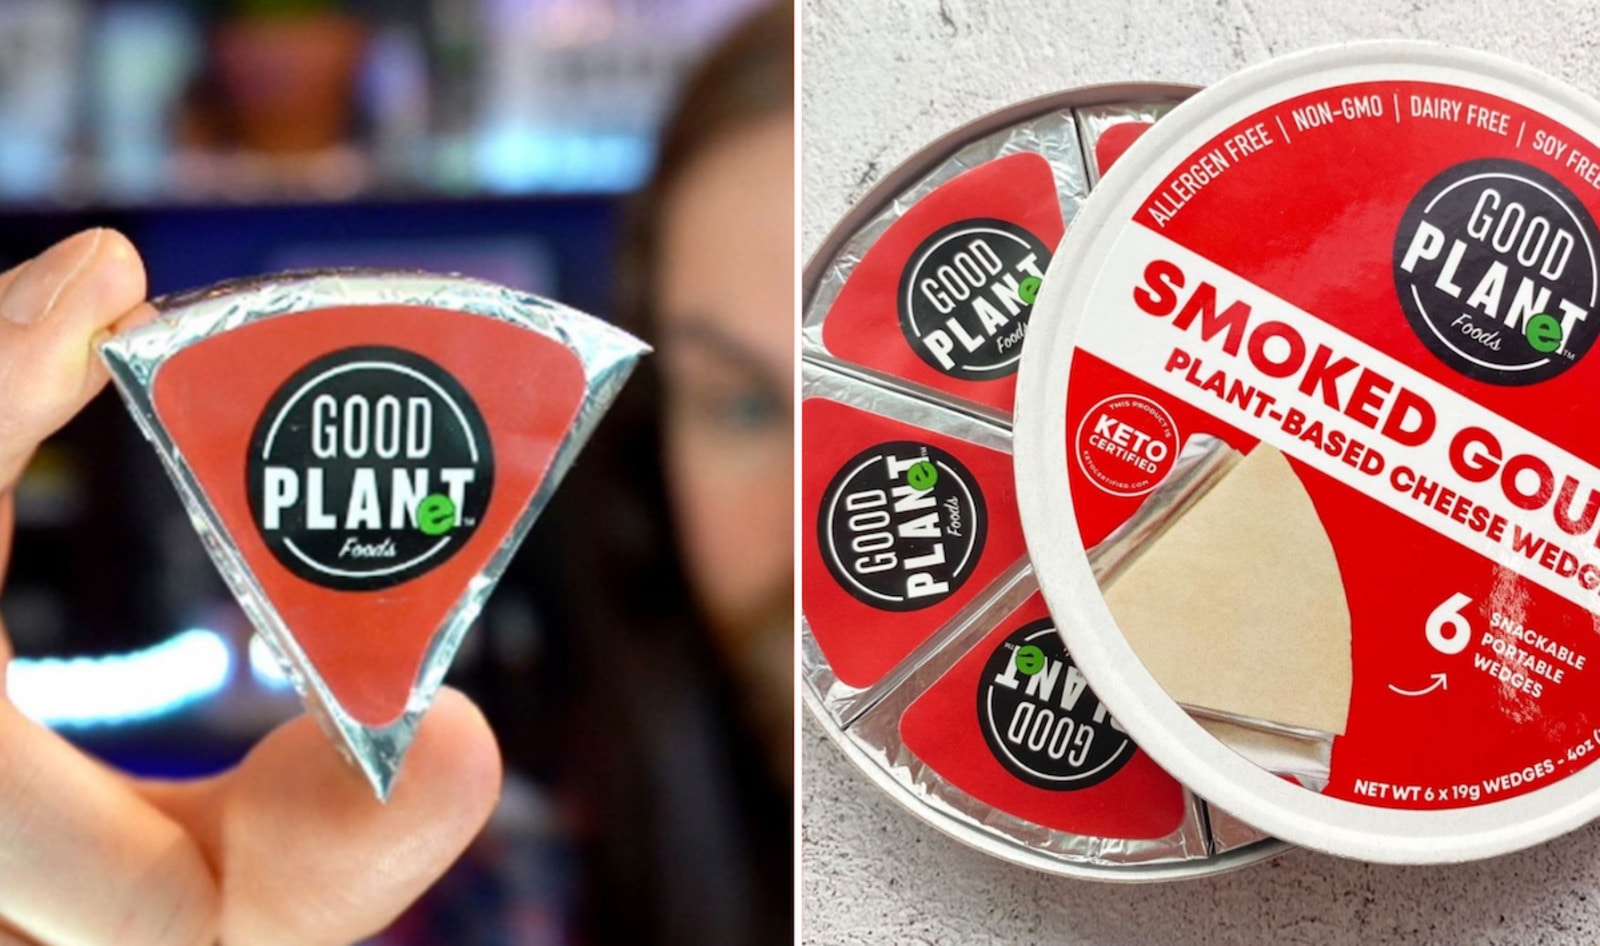 No Joke: These New Dairy-Free Snacking Cheese Wedges Are Just Like Laughing Cow&nbsp;